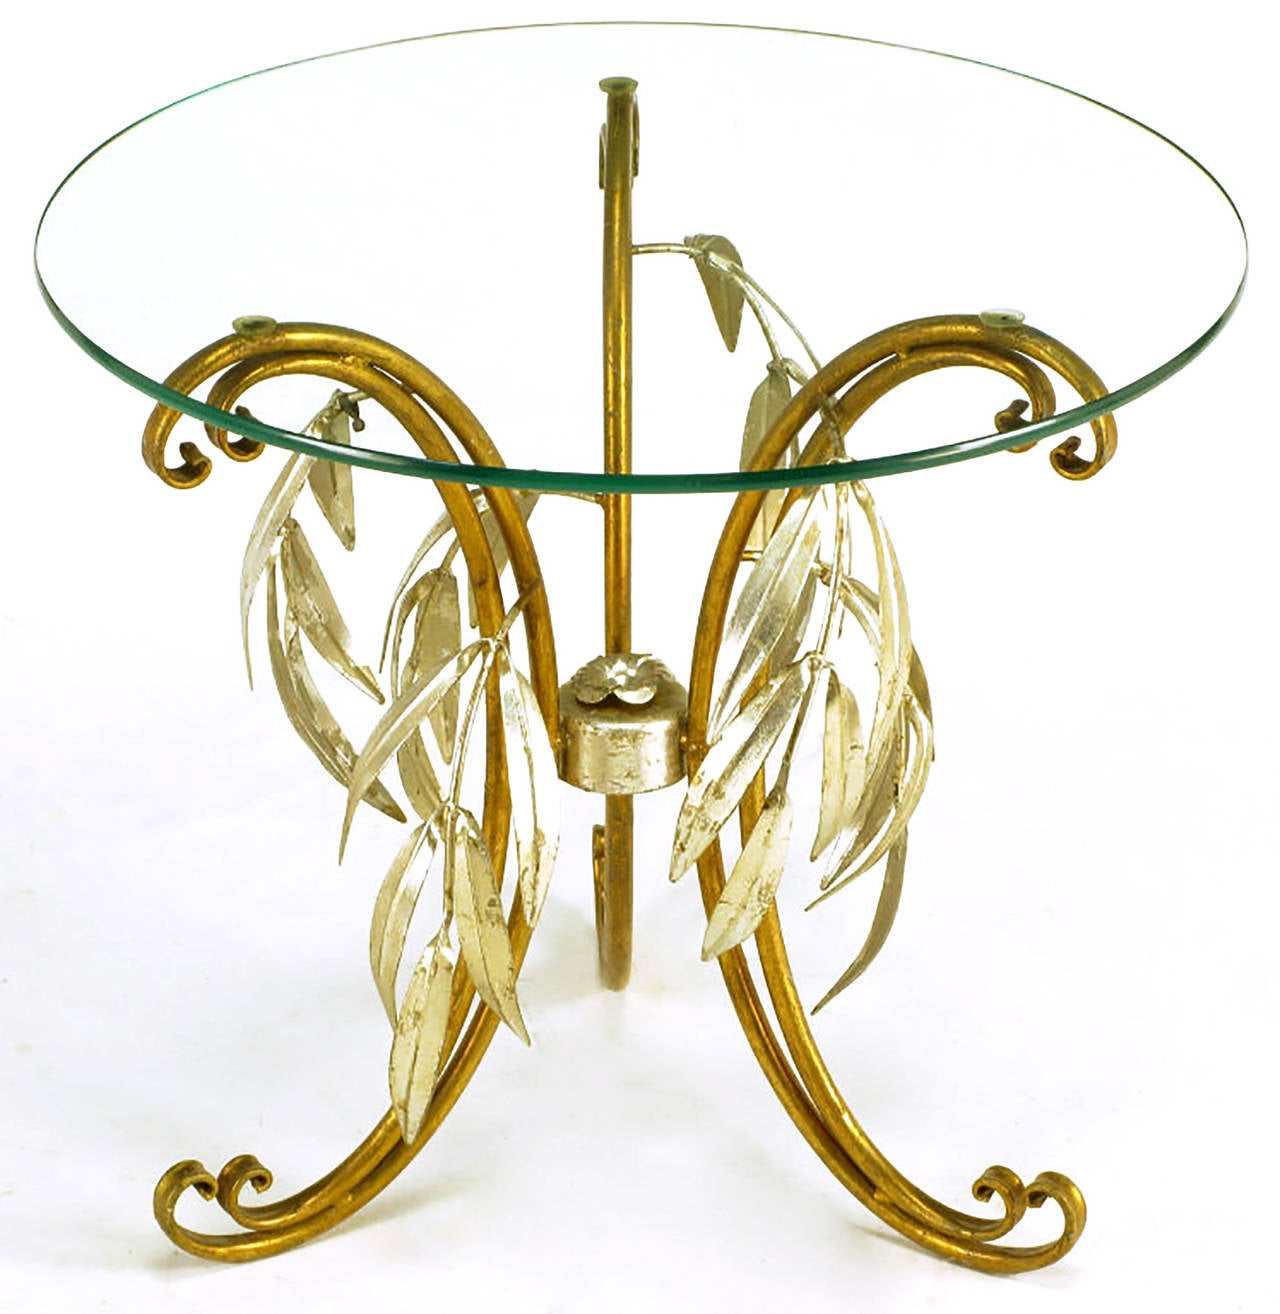 Pair of Italian gold and silver leaf tole metal side tables with round 1/2